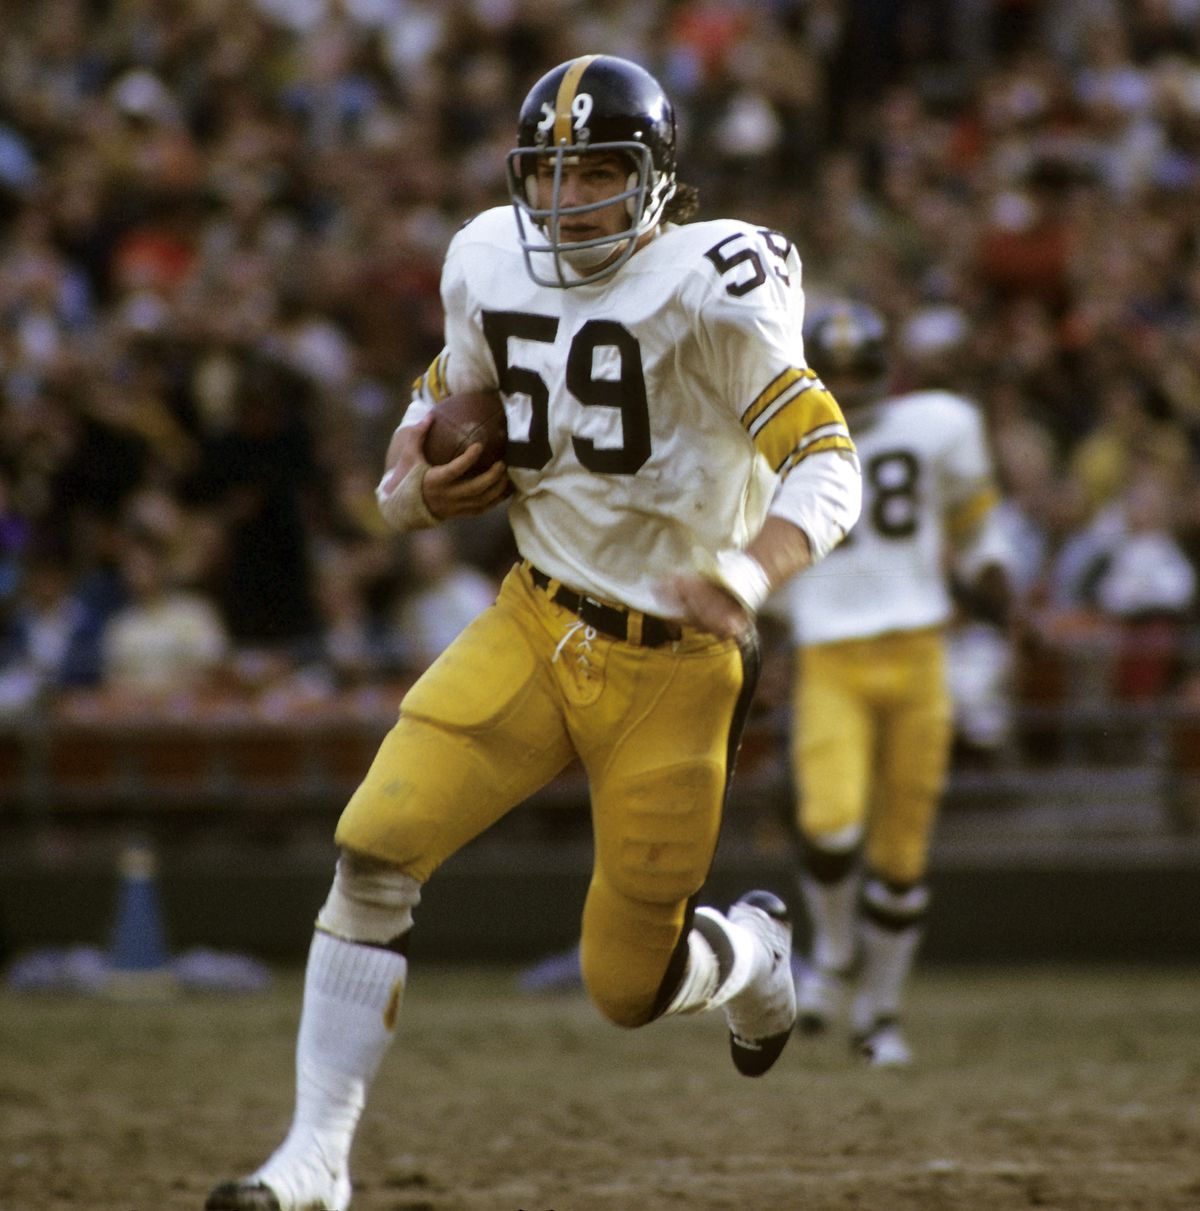 Pittsburgh Steelers vs San Diego Chargers - December 17, 1972